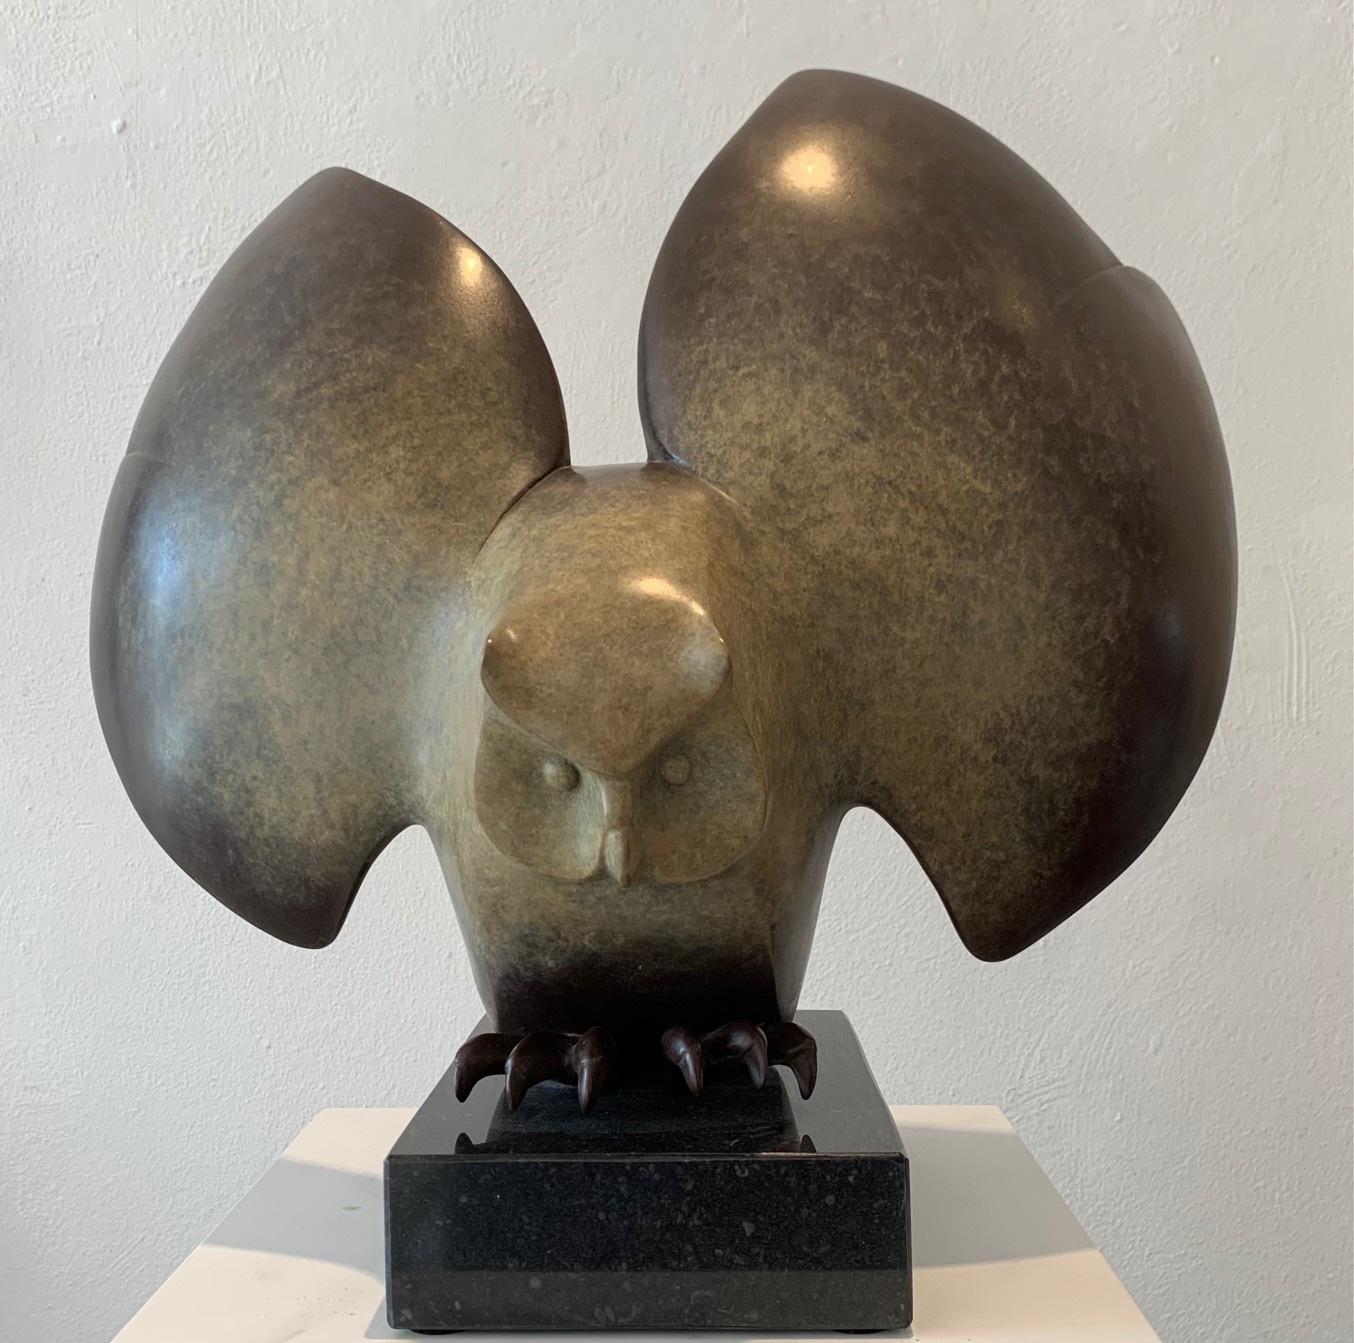 Landende Uil no. 3 Landing Owl Bronze Sculpture Bird Limited Edition Special Patina
Evert den Hartog (born in Groot-Ammers, The Netherlands in 1949) followed his education to be a sculptor at the Rotterdam Academy of Visual Arts. In the years